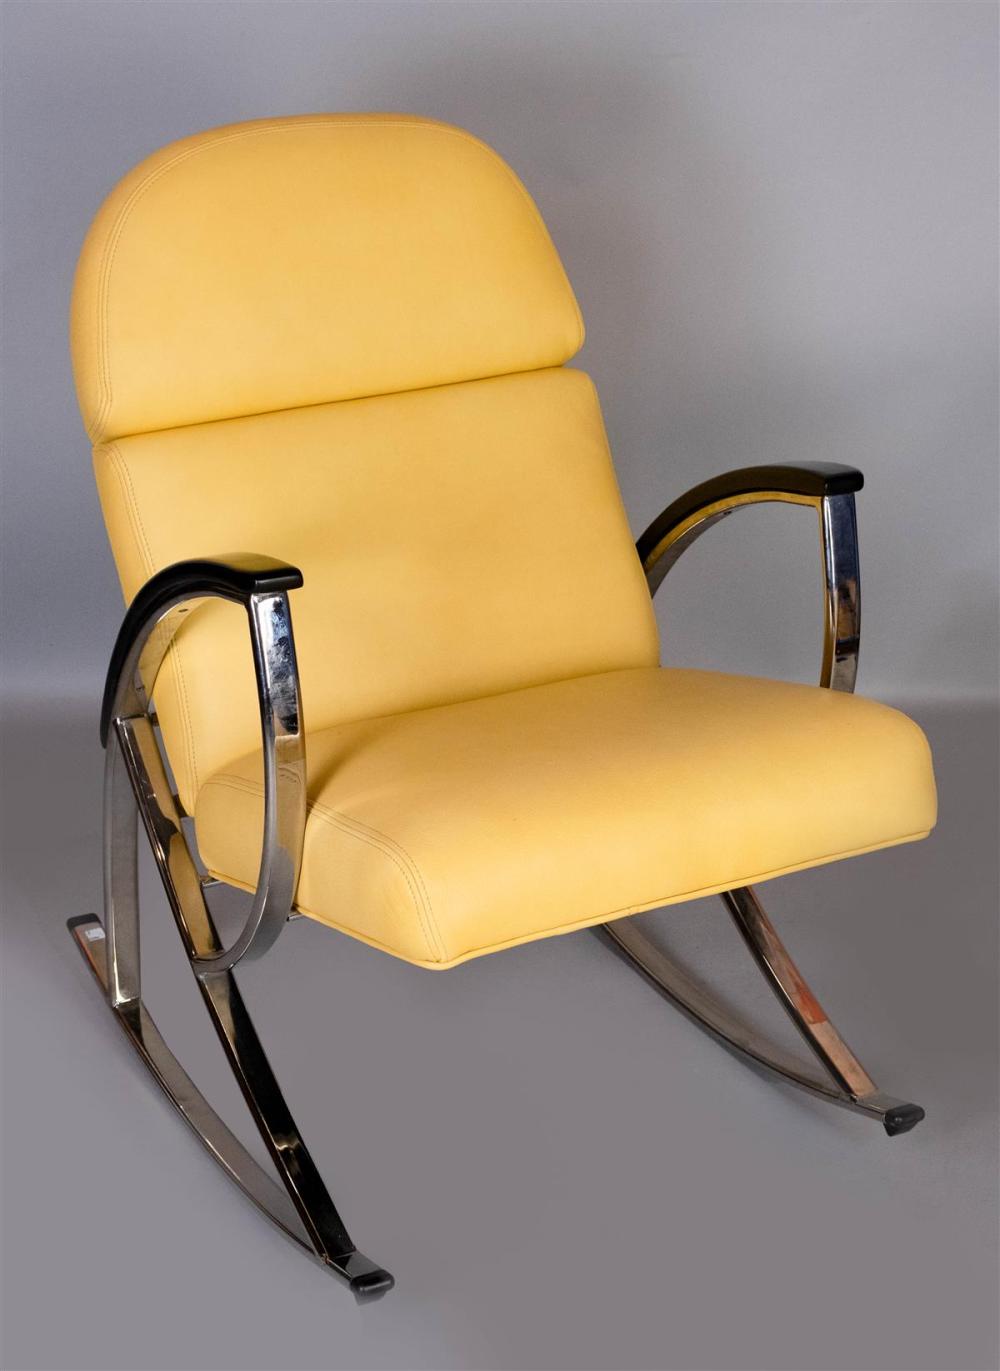 UNUSUAL MODERNIST YELLOW LEATHER 312205